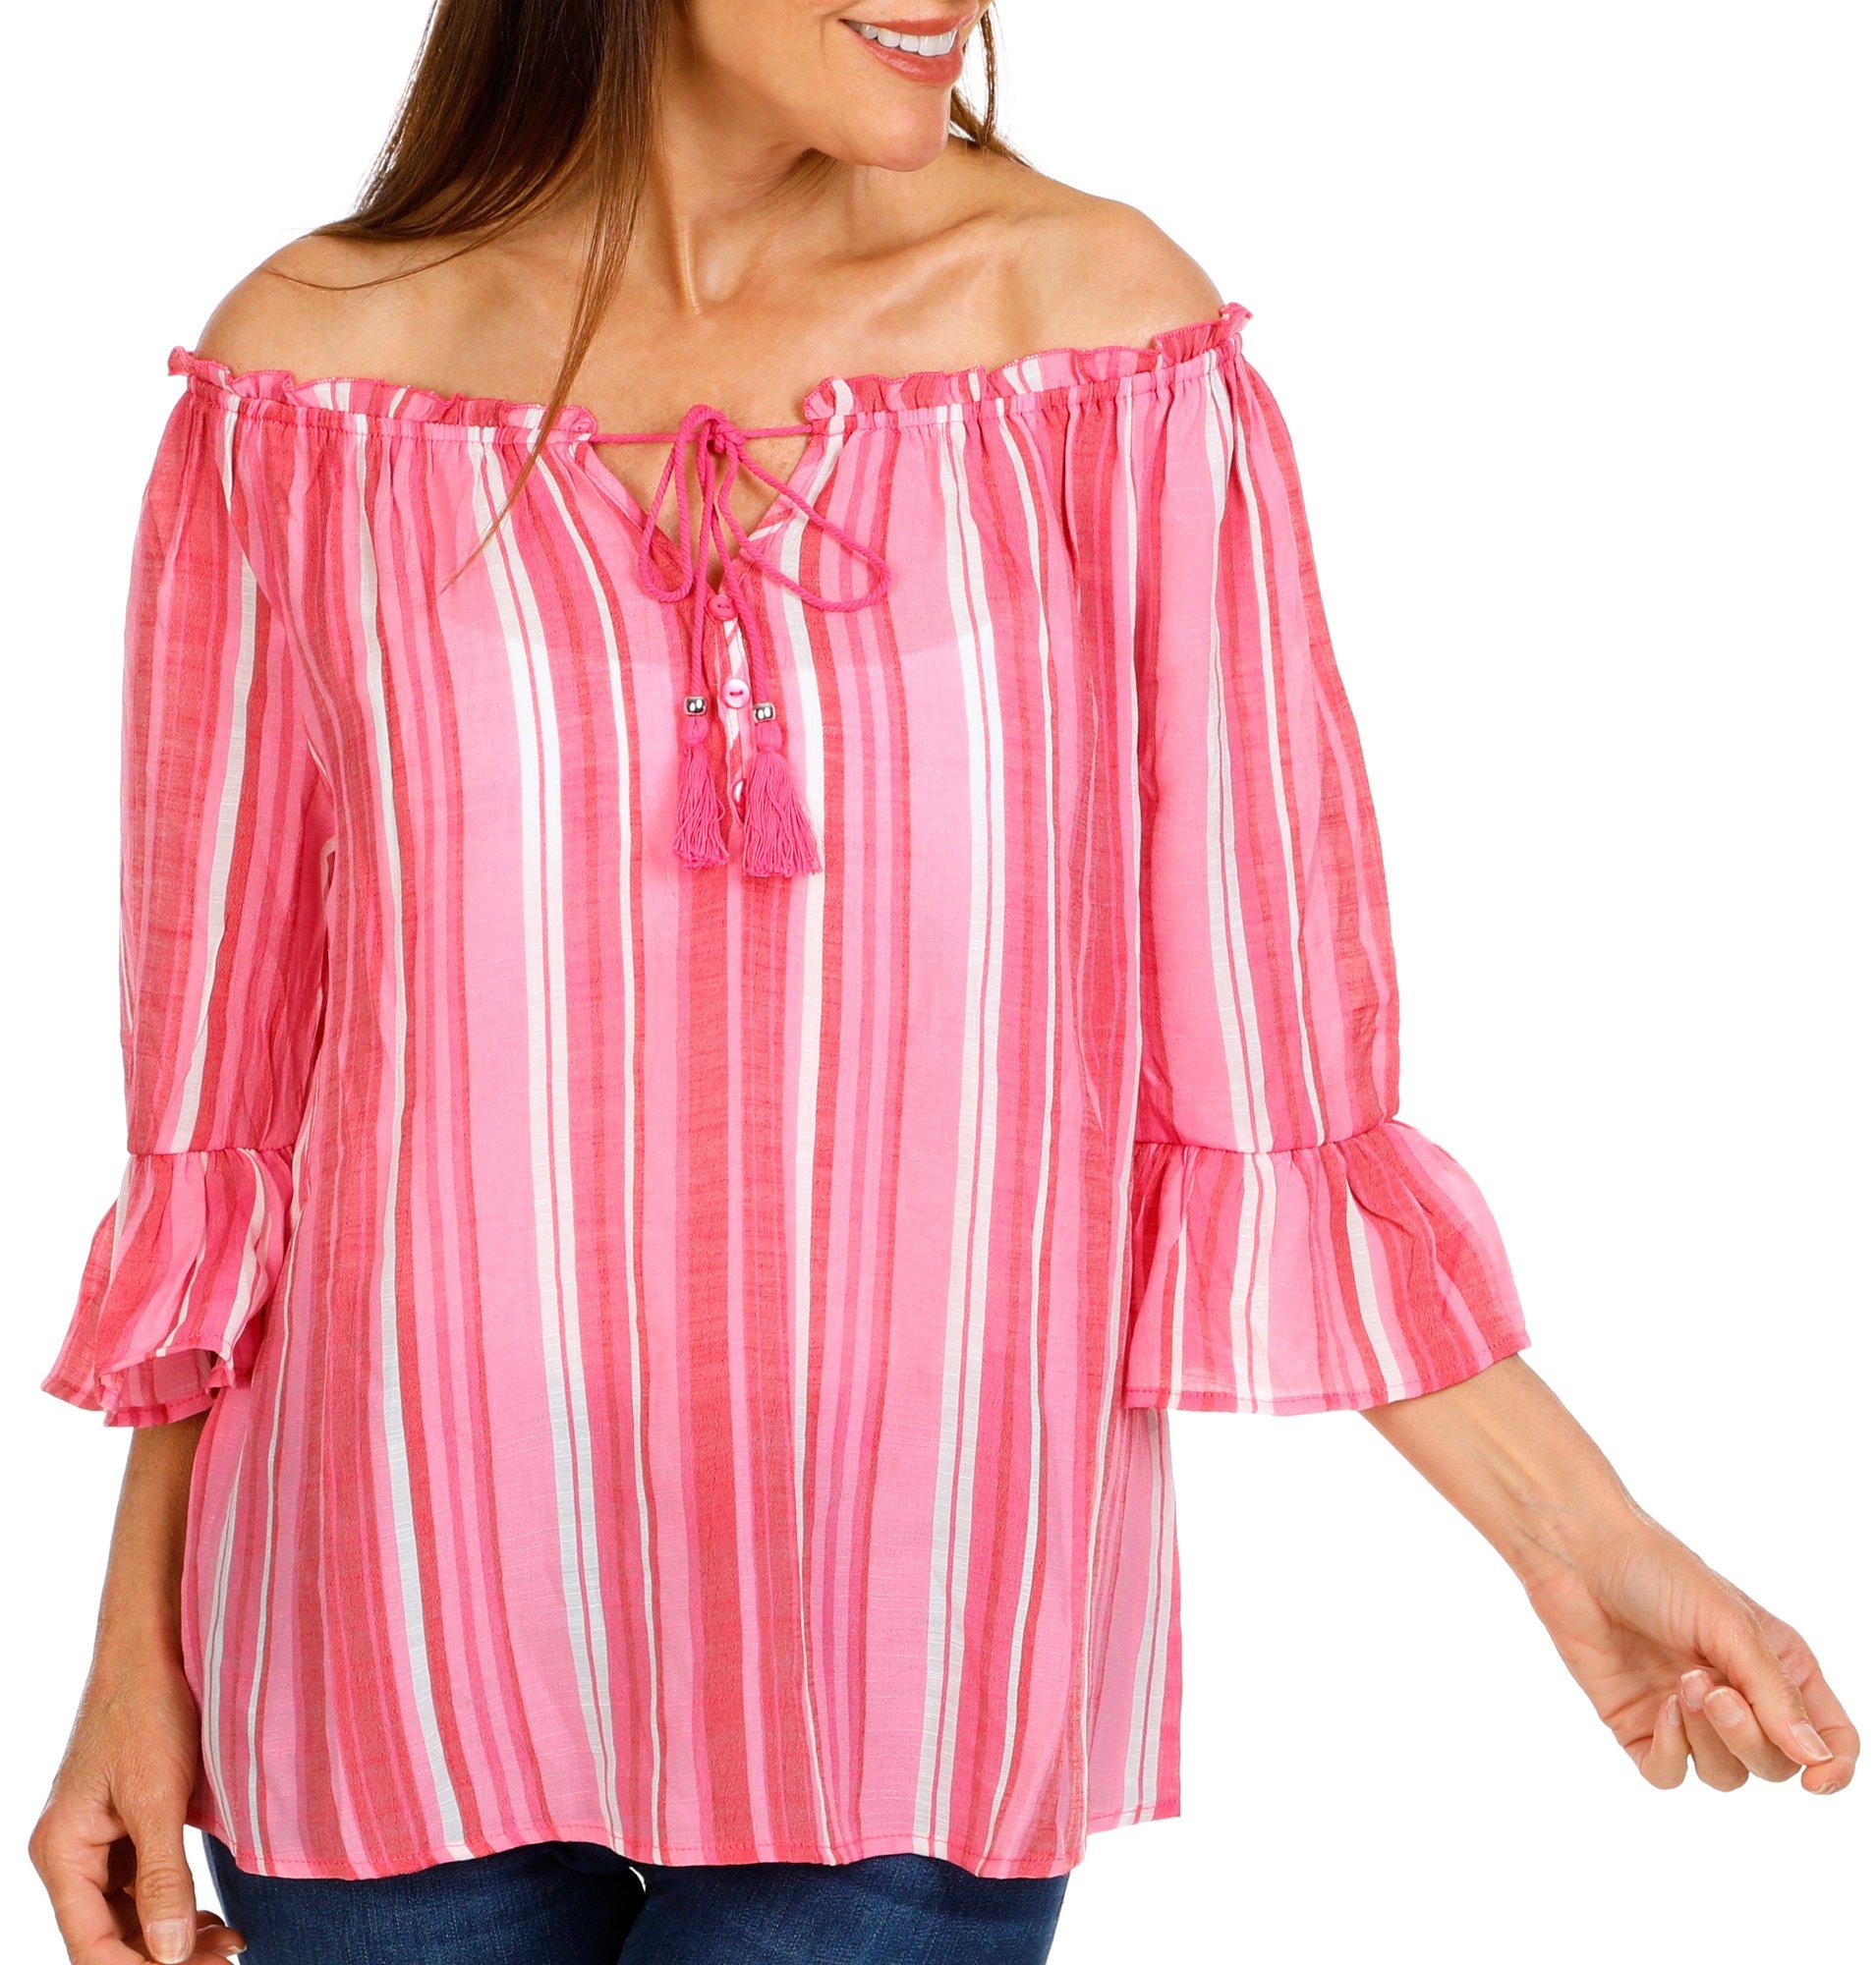 Women's Striped Off The Shoulder Top